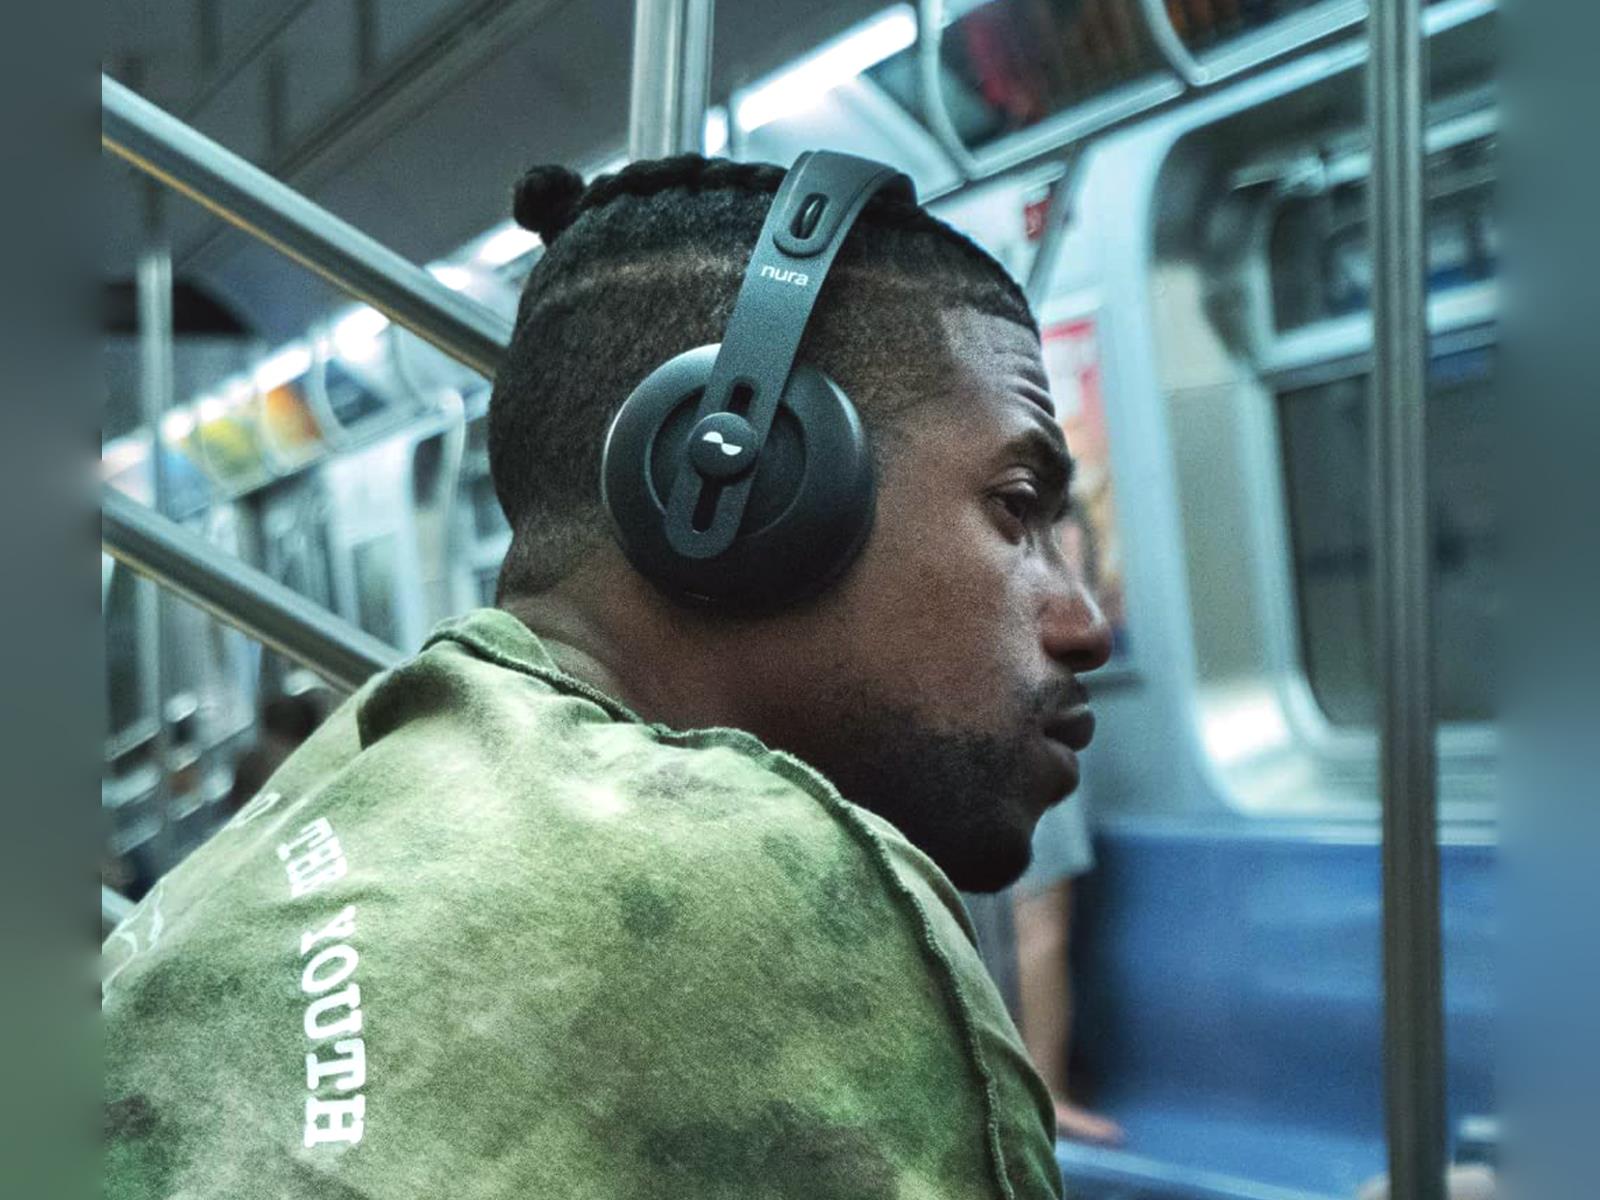 Nuraphones Used By Man While Listening To Music On A Train